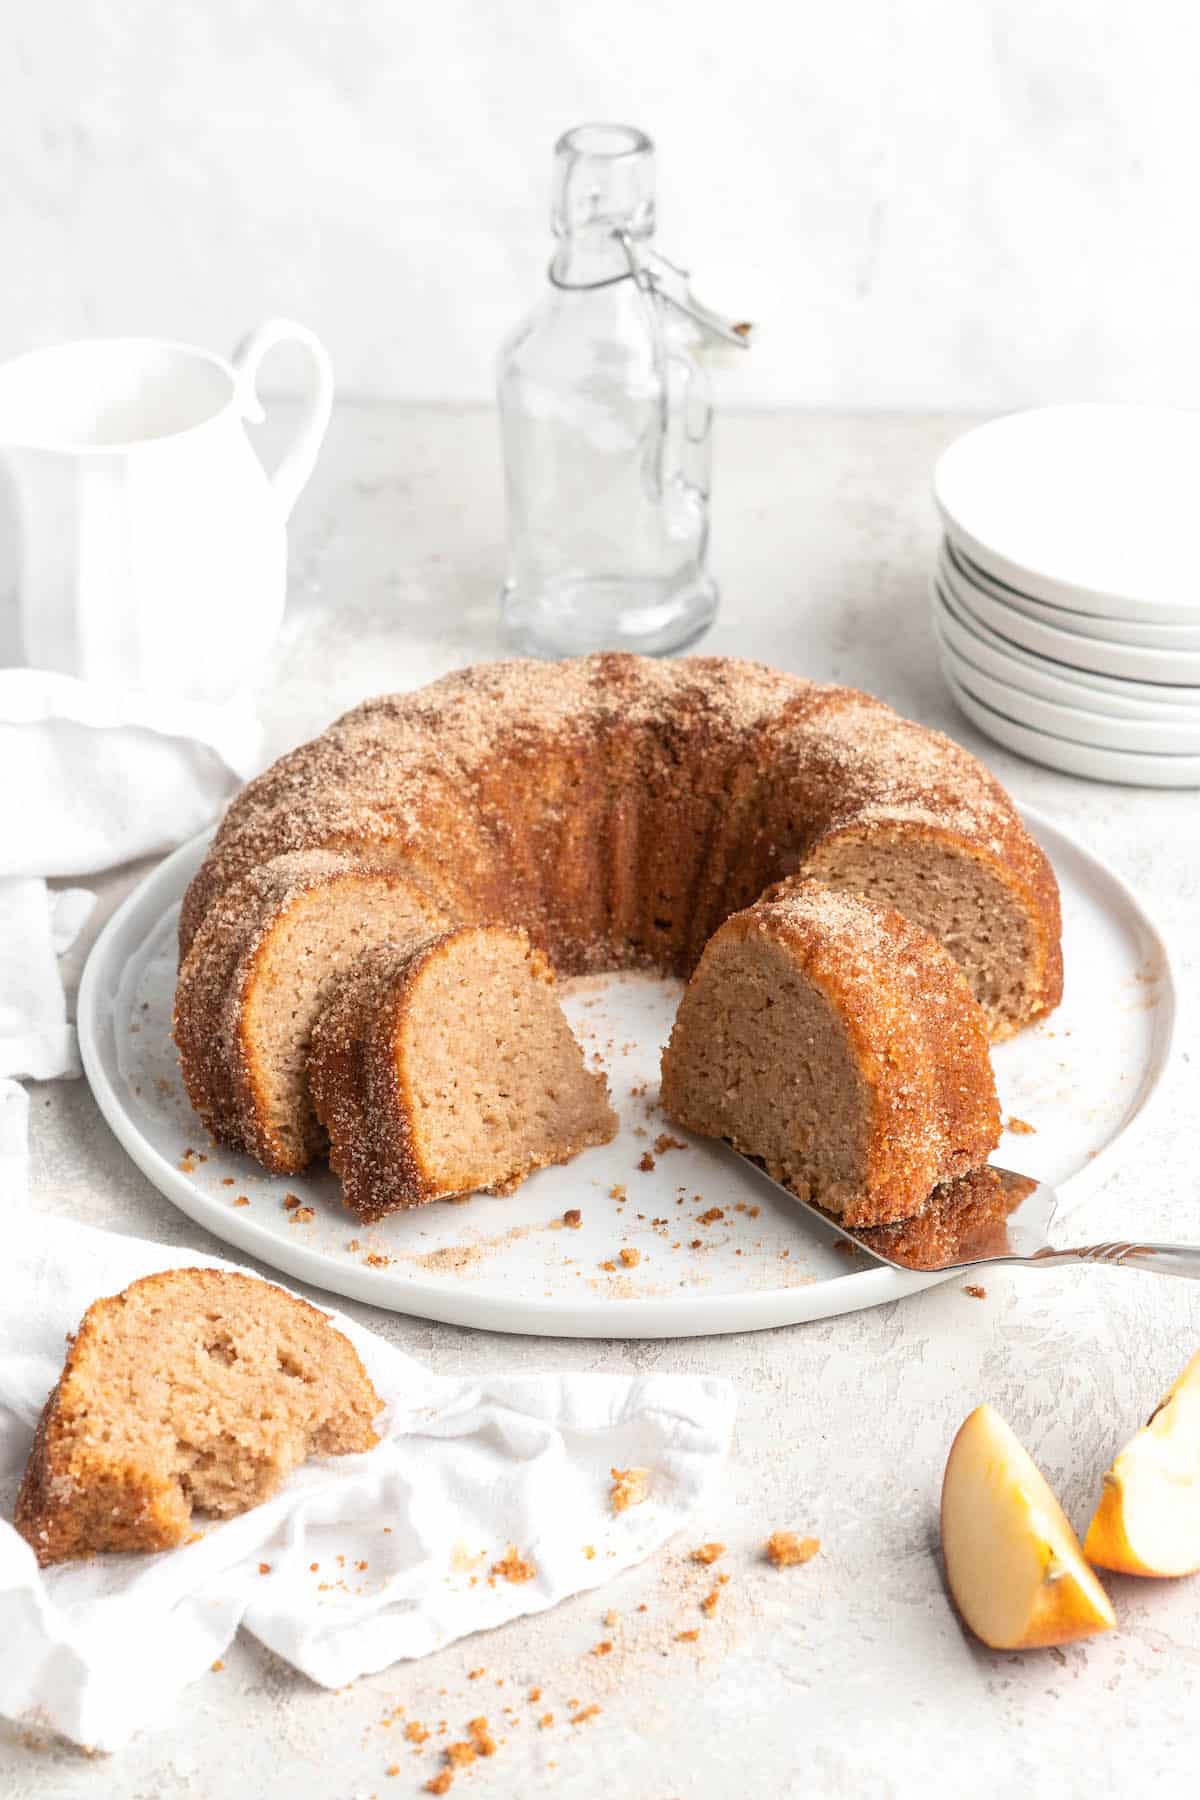 Slices of an apple cider donut cake against a white background